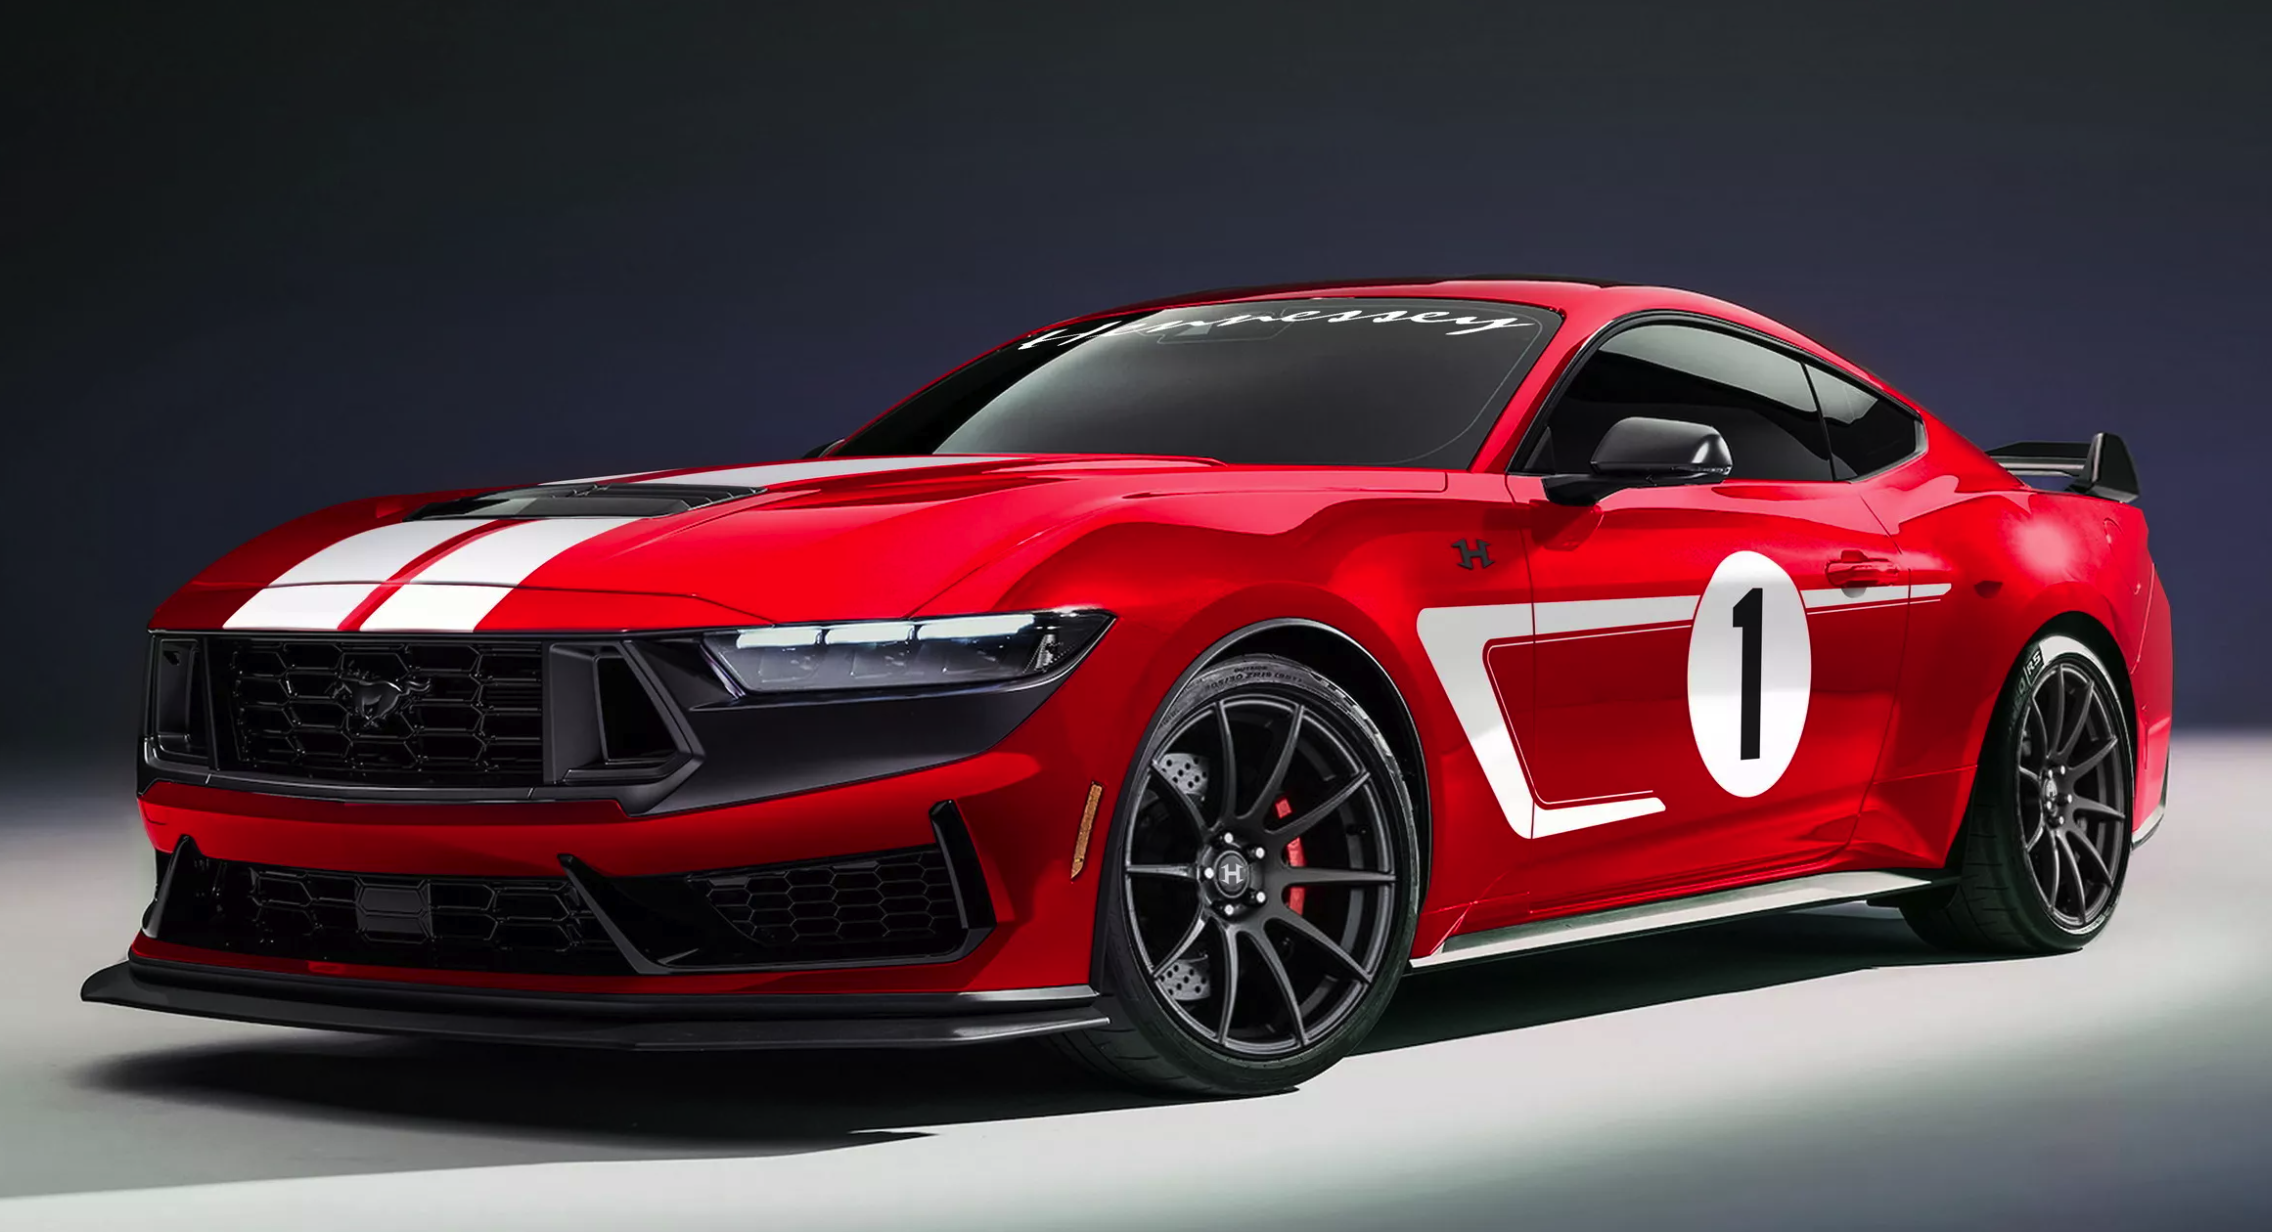 hennessey turns the mustang dark horse into a 850hp beast